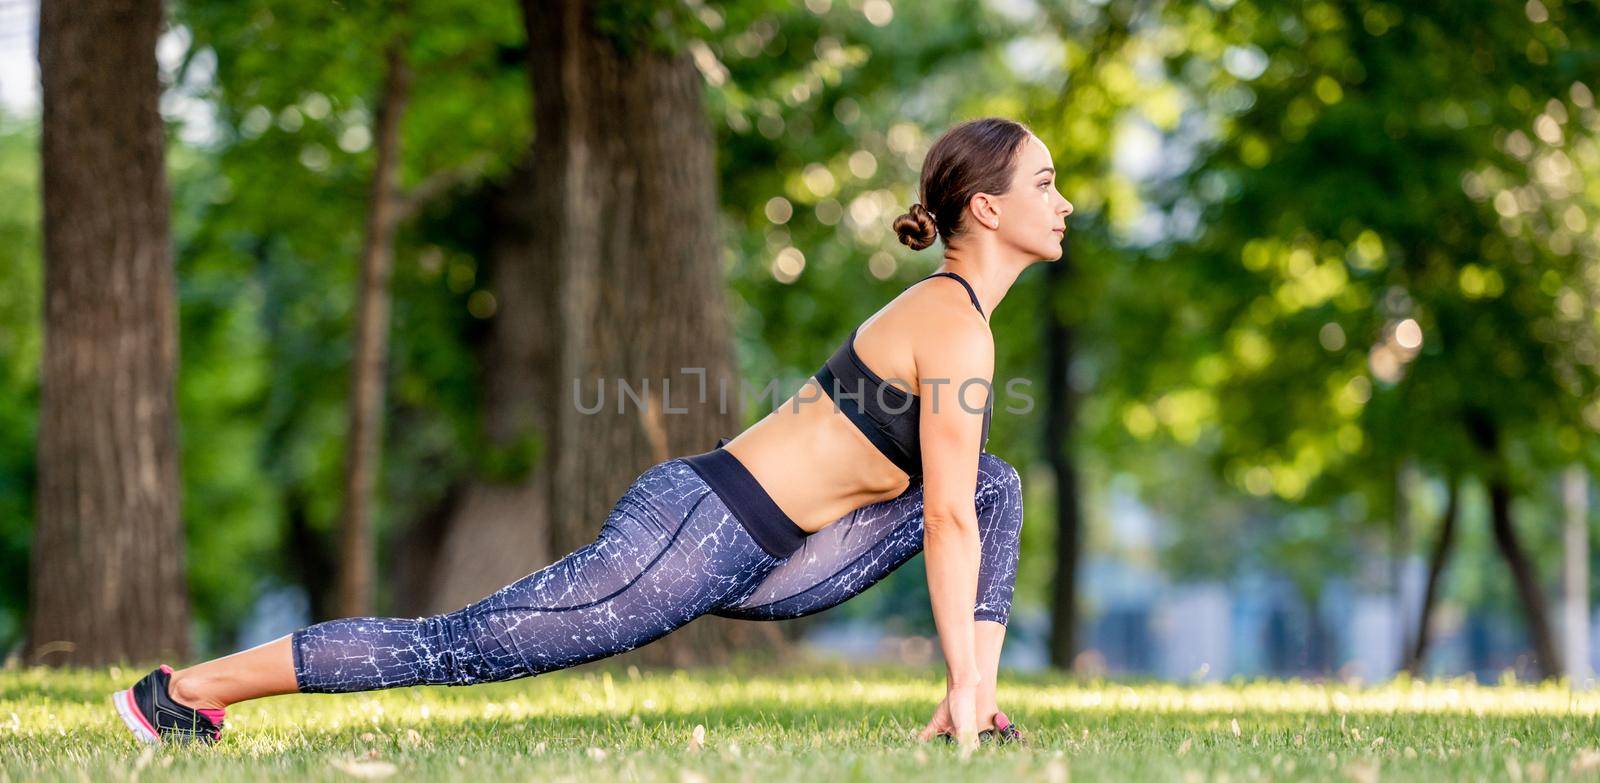 Pretty girl during yoga morning workout at the nature standing in pose in park. Sport woman exercising and stretching her legs outdoors